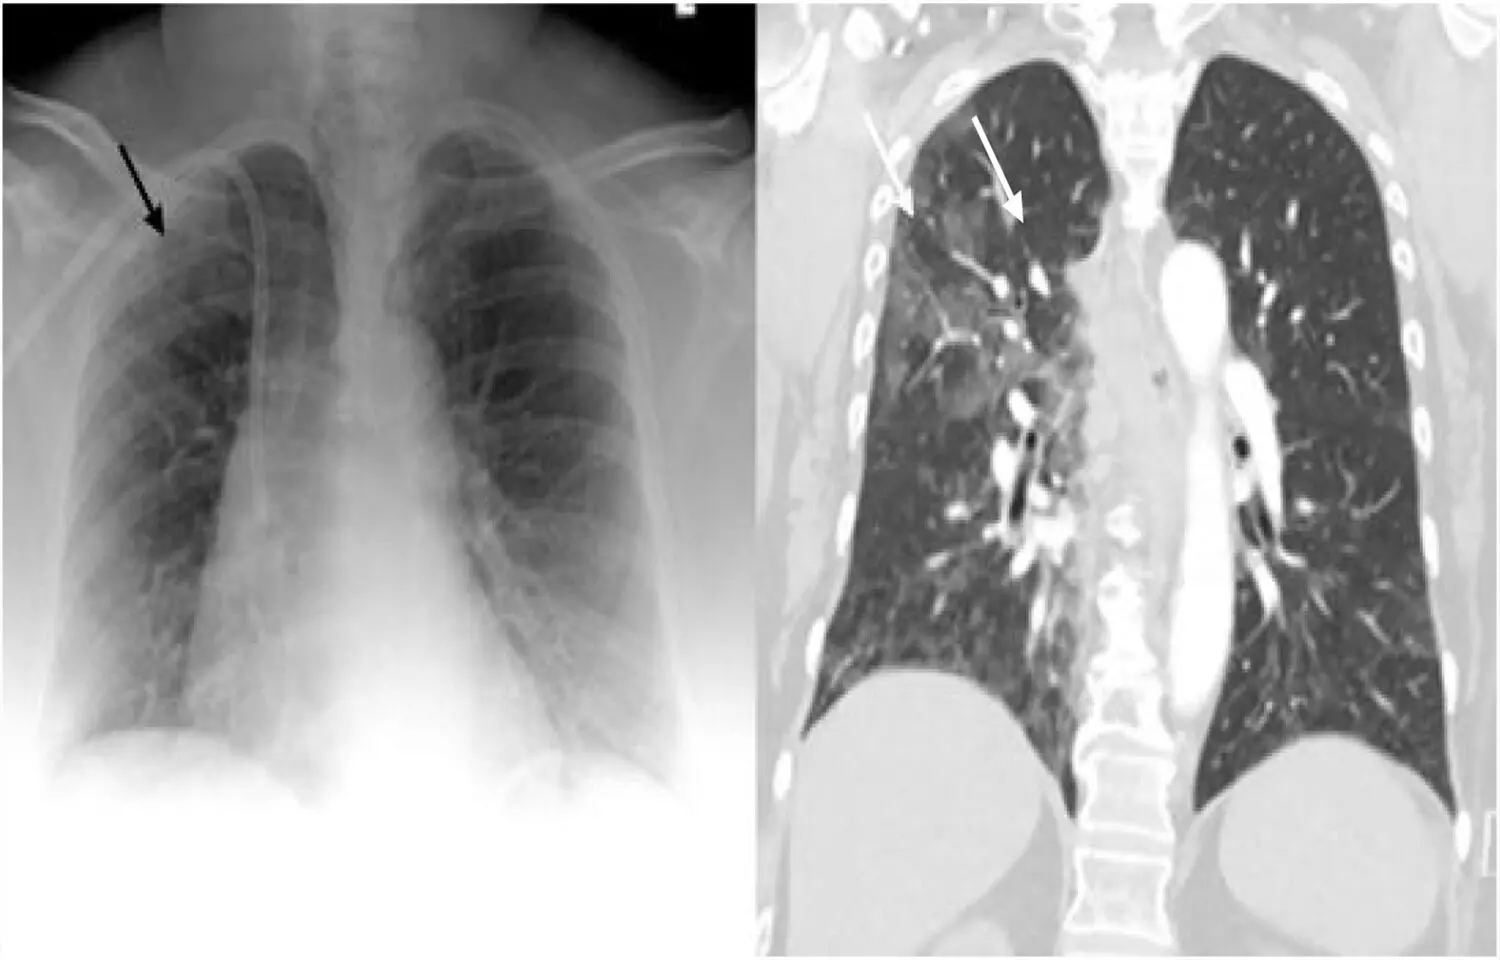 Chest radiography useful for early COVID detection, particularly in older adults: Study